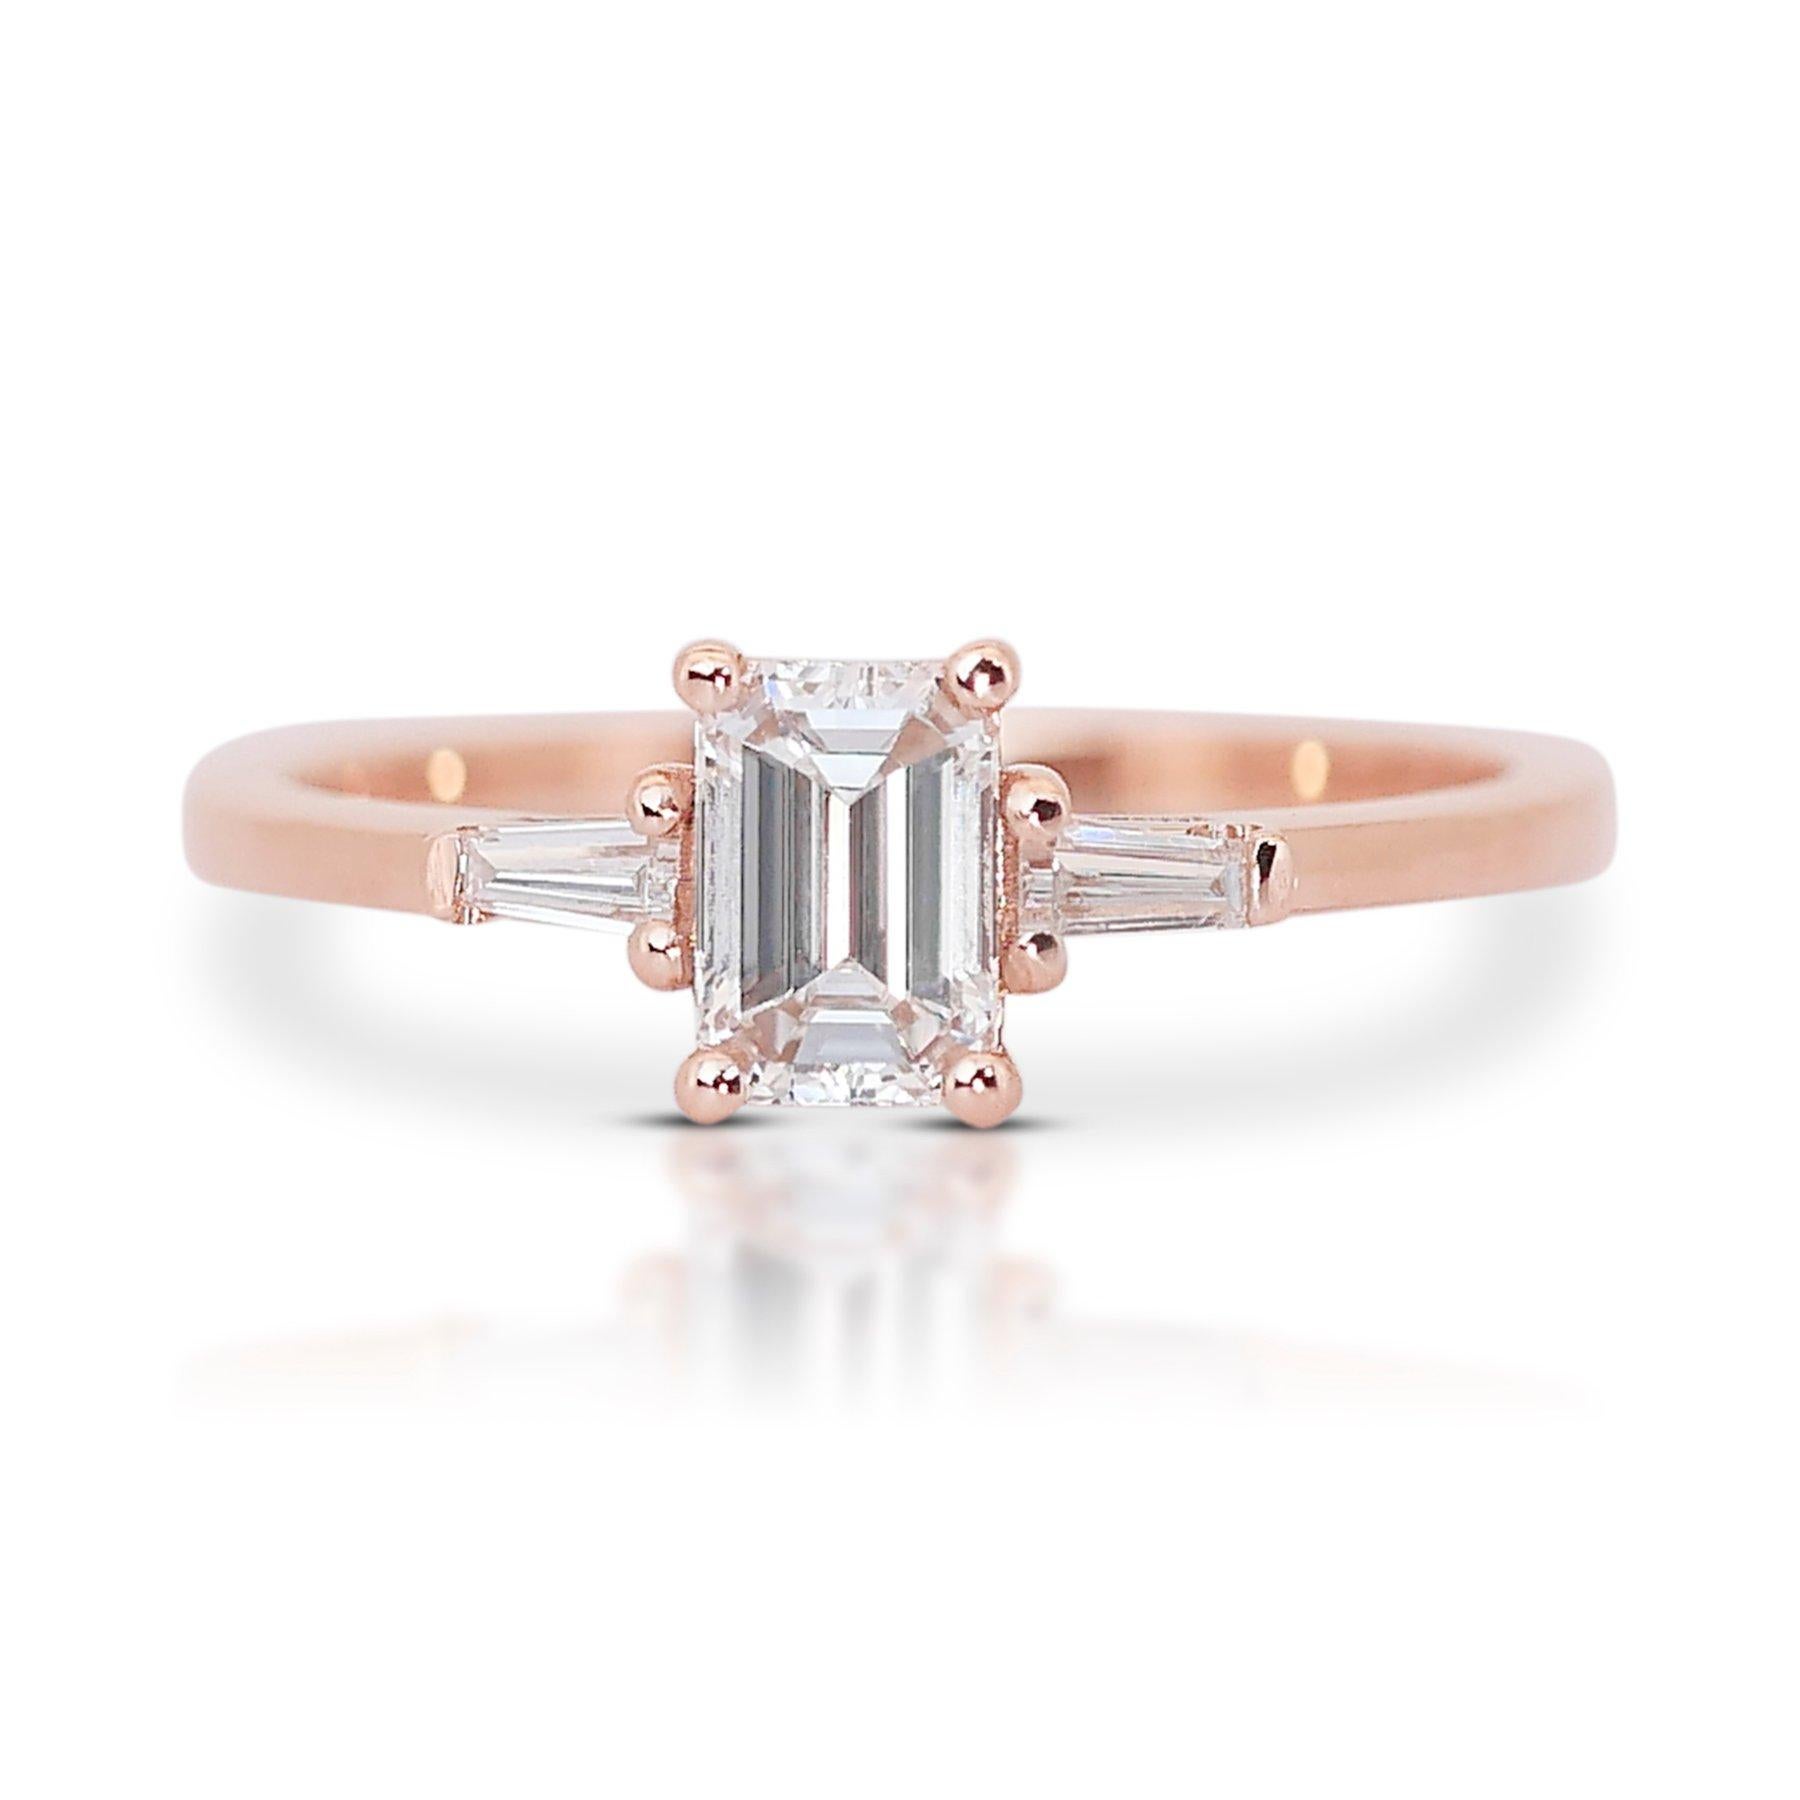 Elegant 0.90ct Emerald-Cut Diamond 3-Stone Ring in 18k Rose Gold - GIA Certified For Sale 3